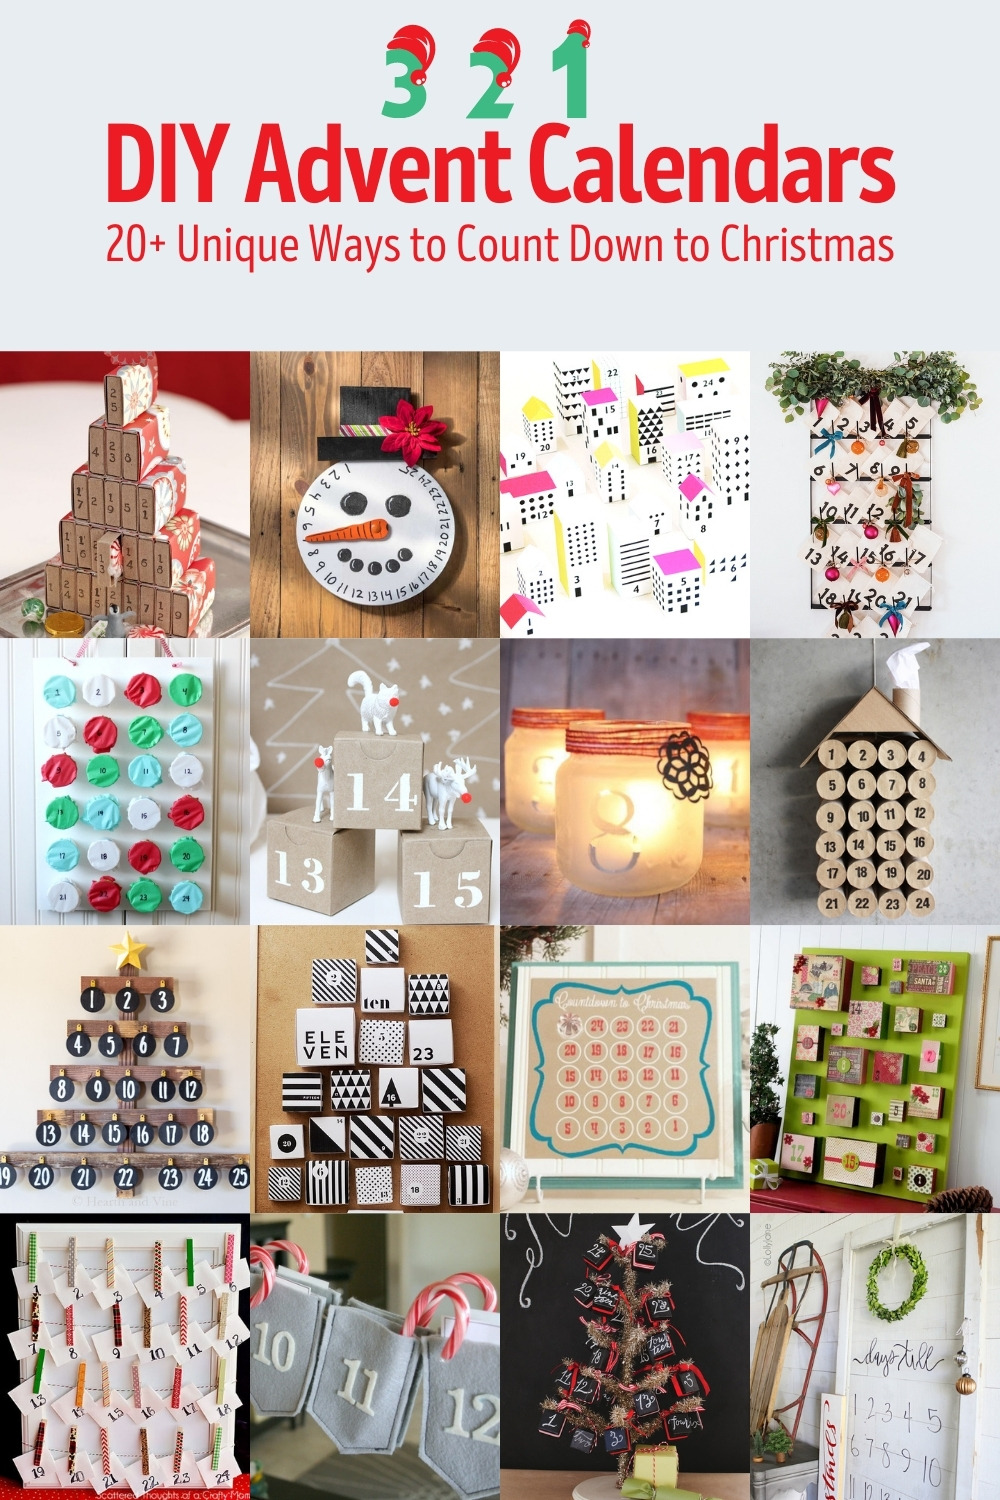 Over 20 DIY Advent Calendars to Make for Christmas this Year